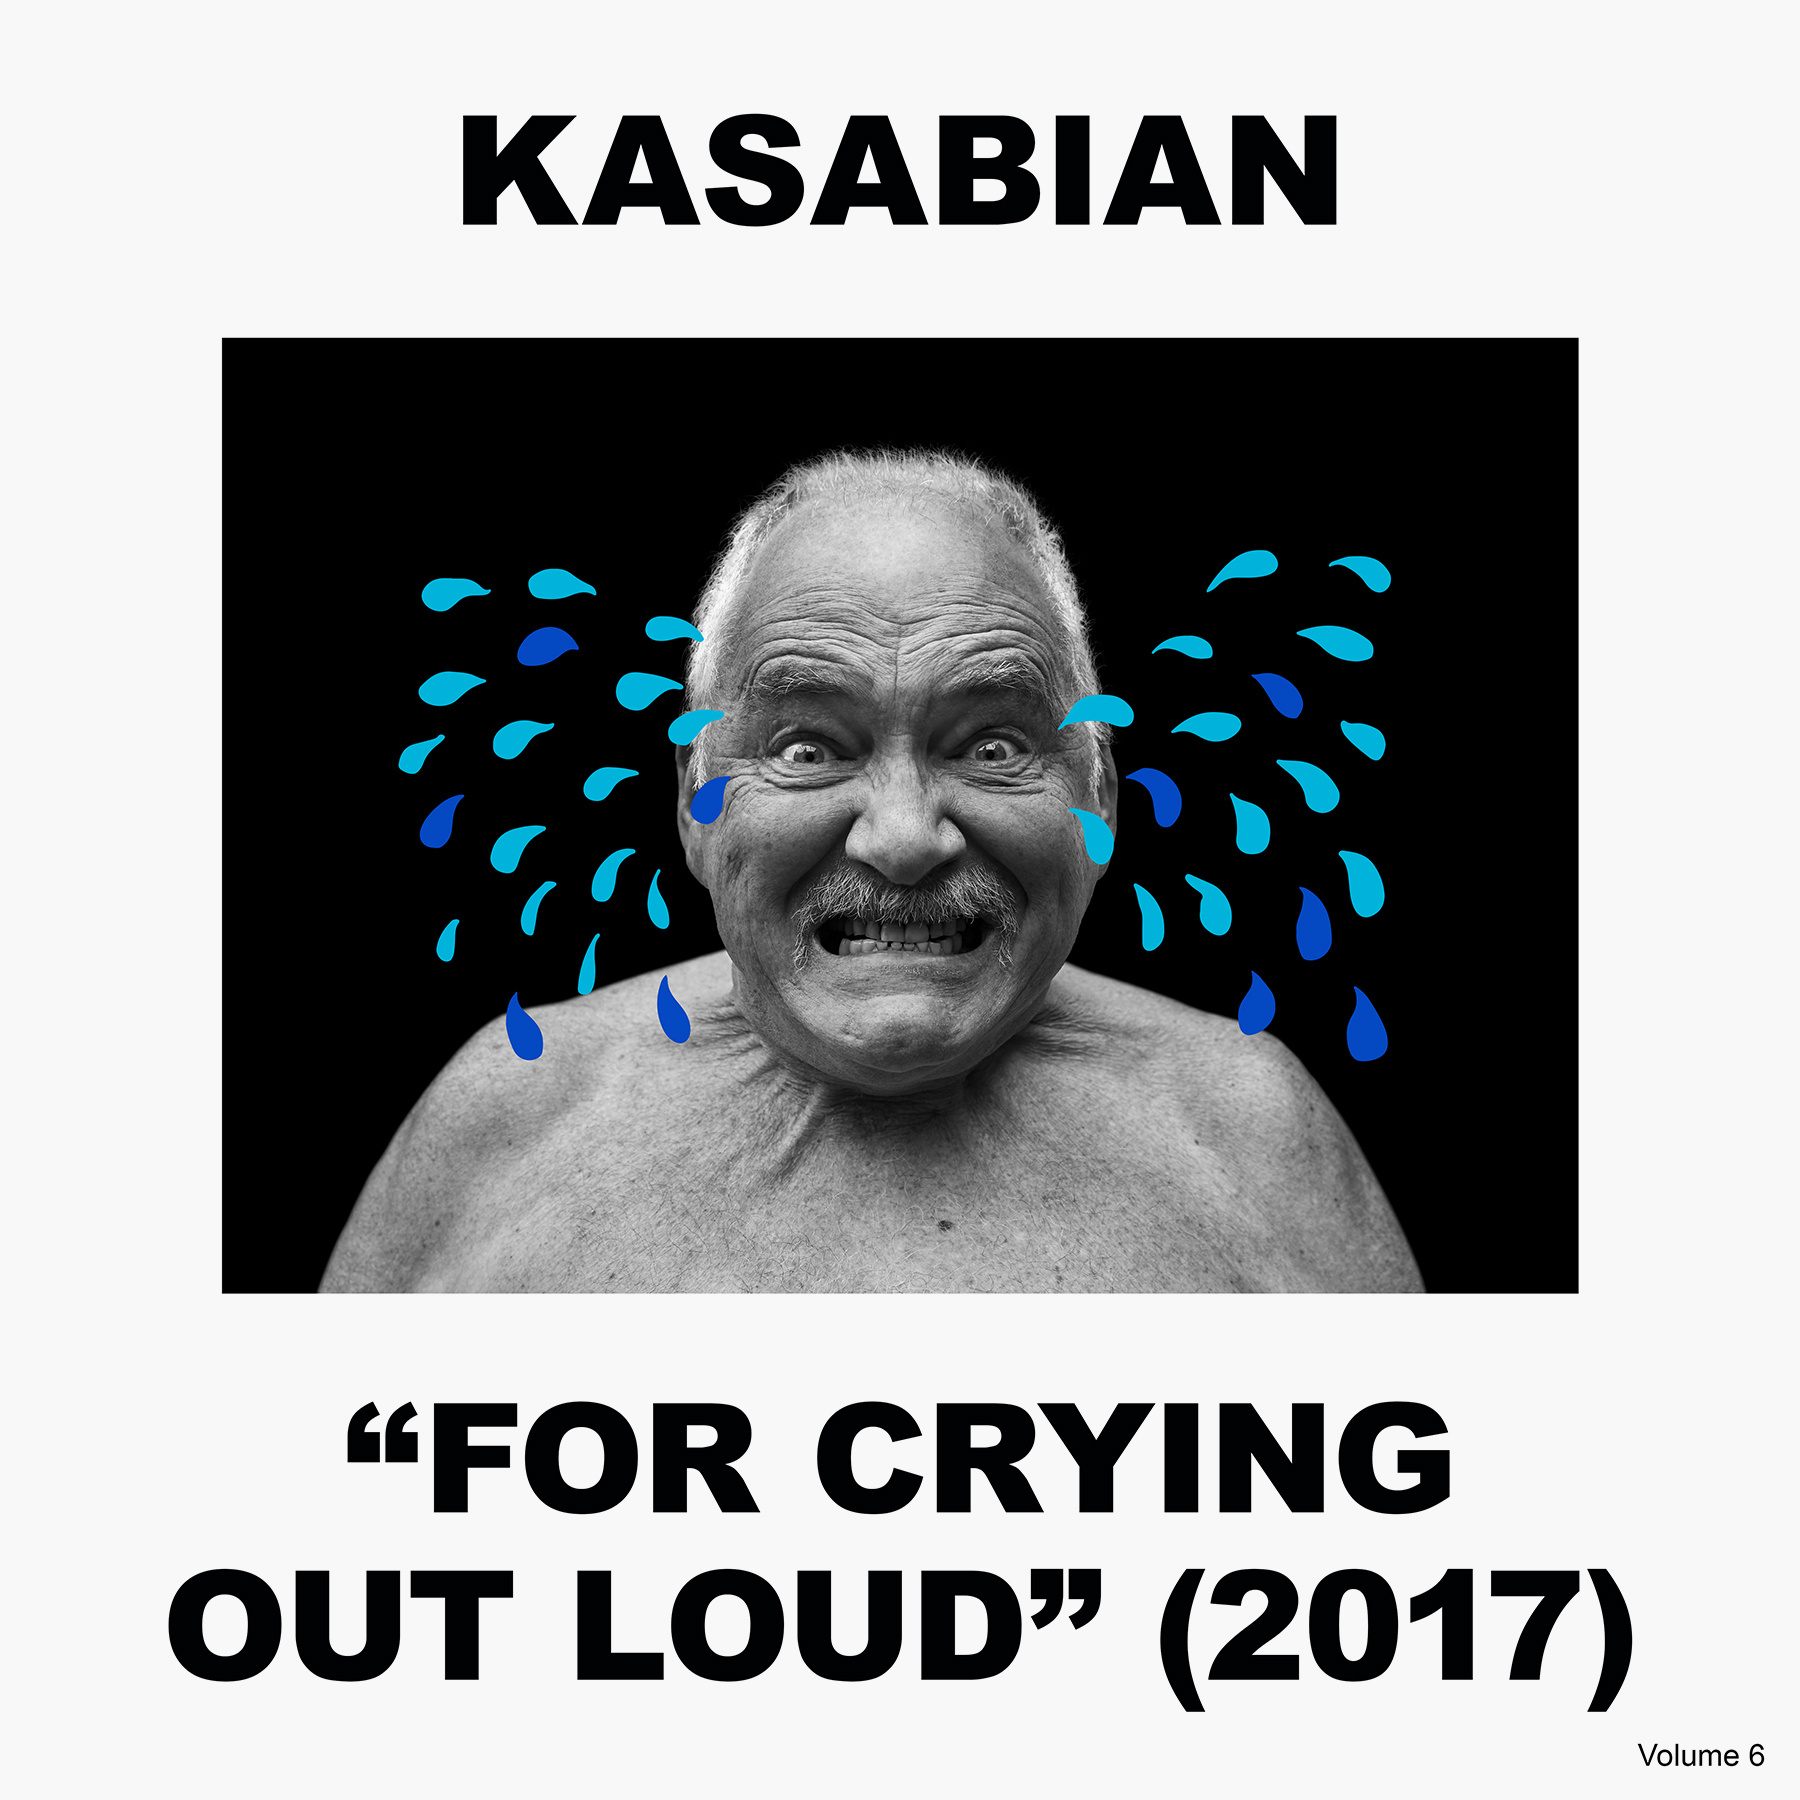 neil_bedford_aitor_throup_kasabian_album_artwork_for_crying_out_loud_sony_records_standard